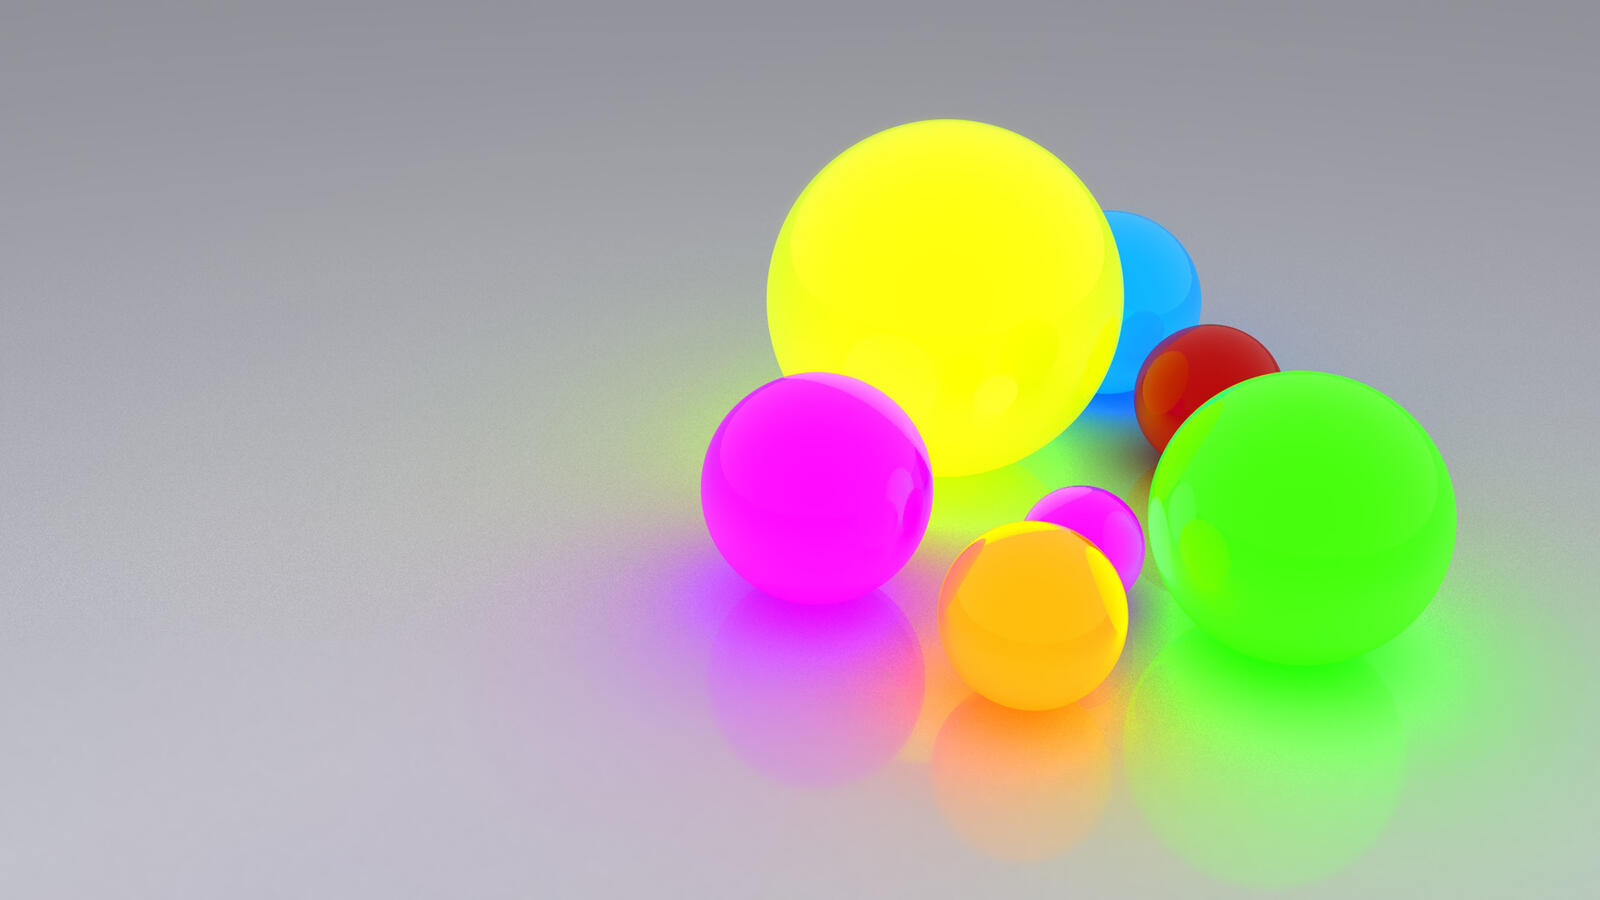 Wallpapers balls bright reflection on the desktop